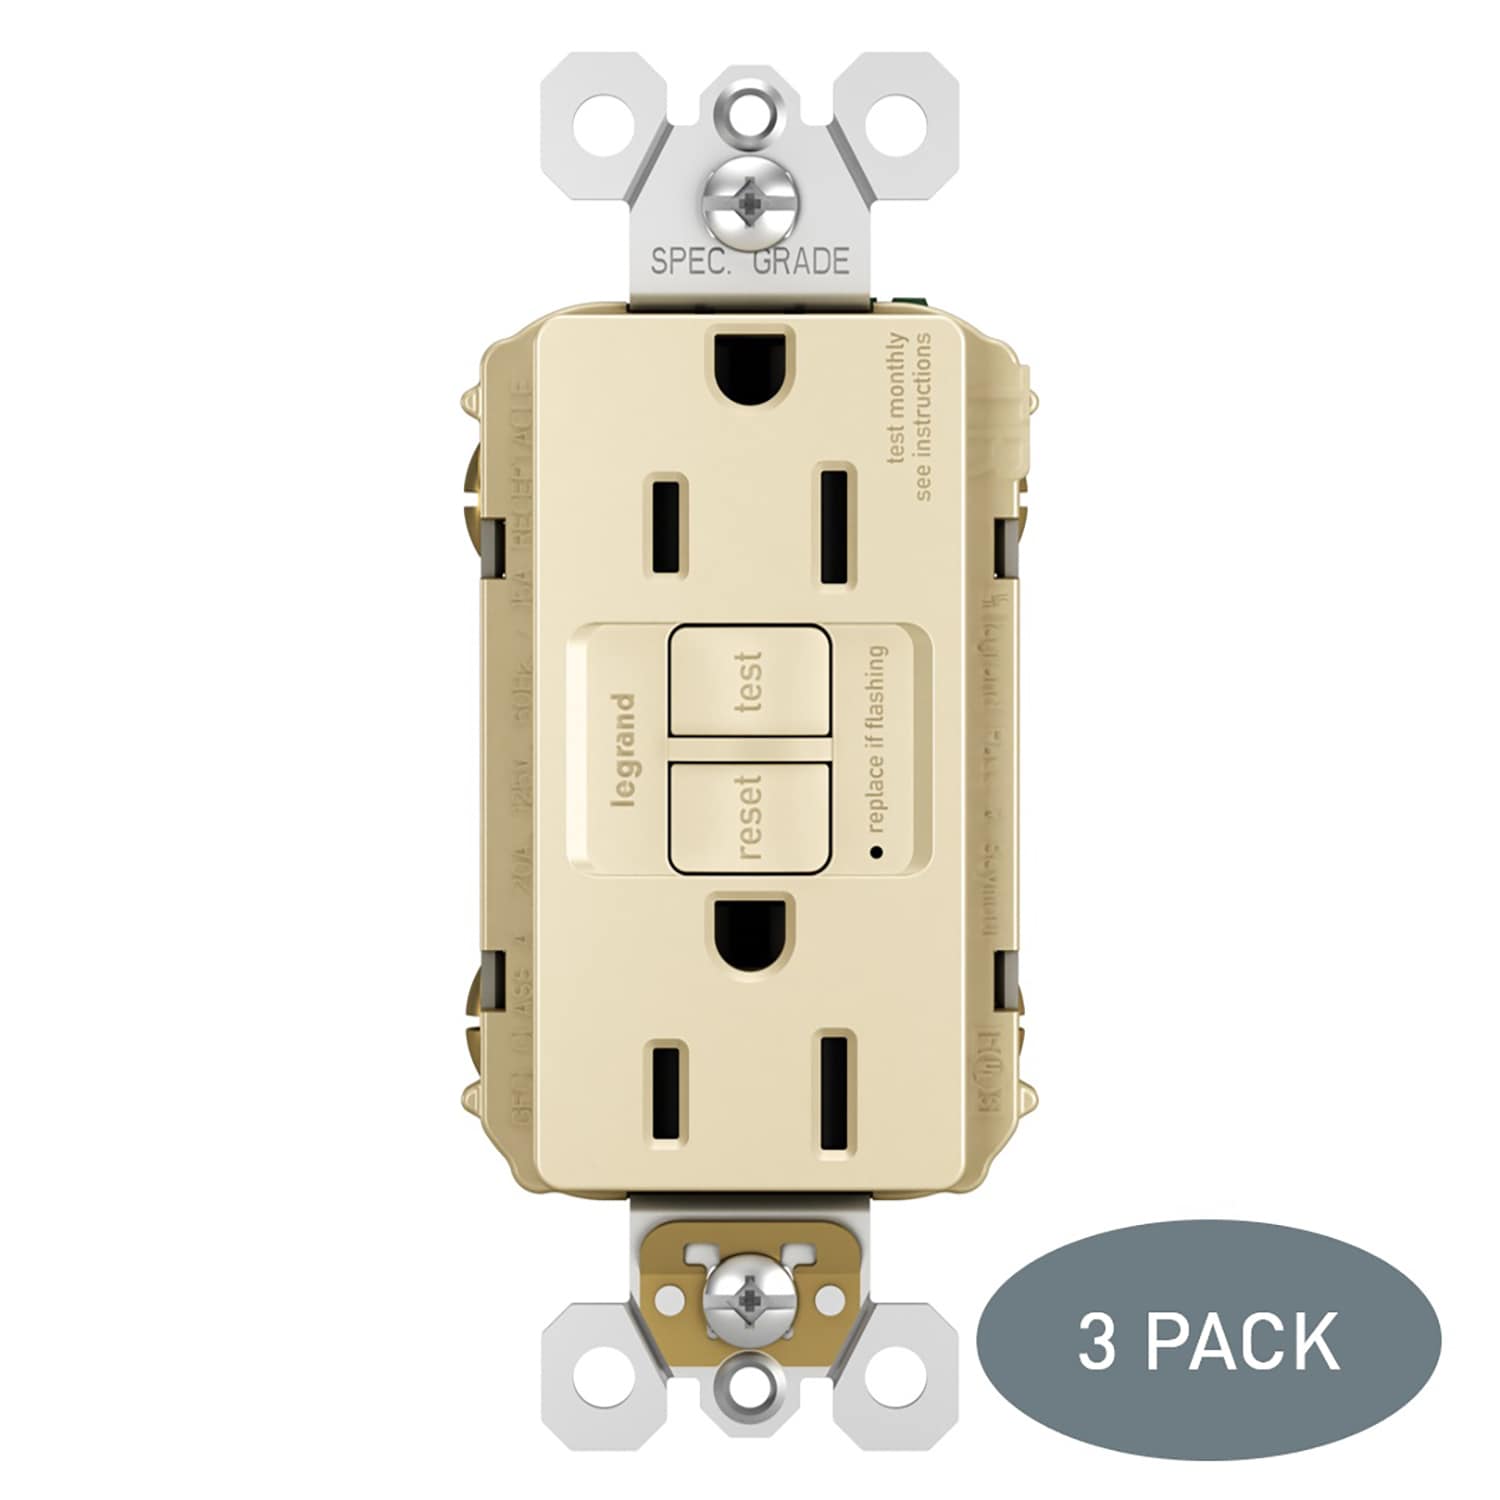 Legrand radiant 15-Amp GFCI Residential/Commercial Decorator Outlet, Light Almond (3-Pack)